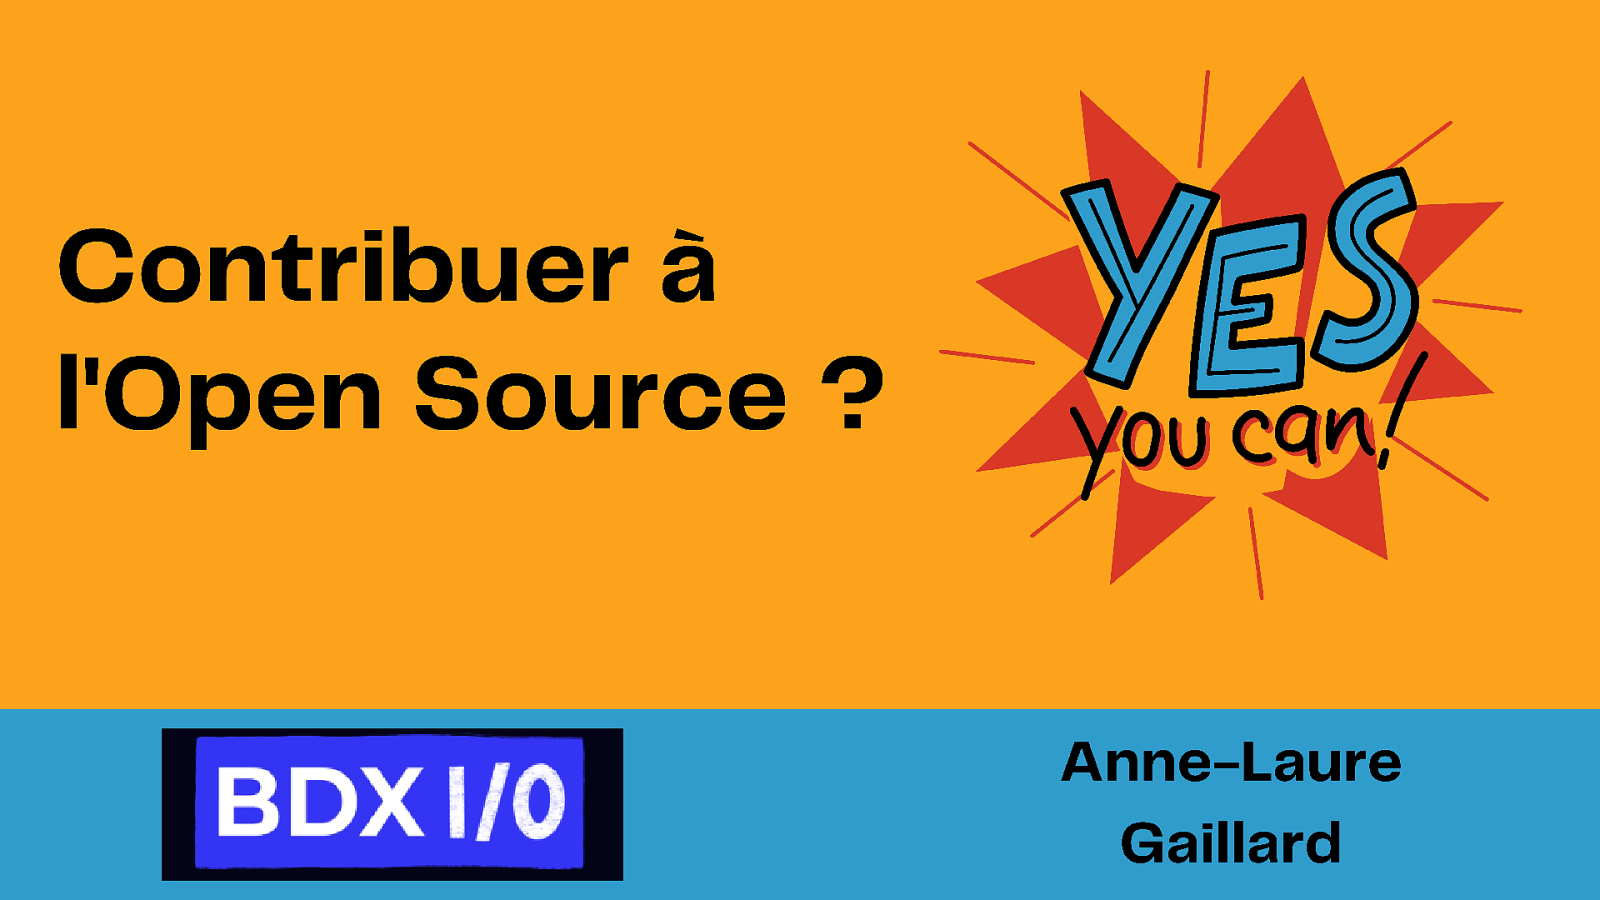 Contribuer à l’Open Source ? Yes, you can! by Anne-Laure Gaillard